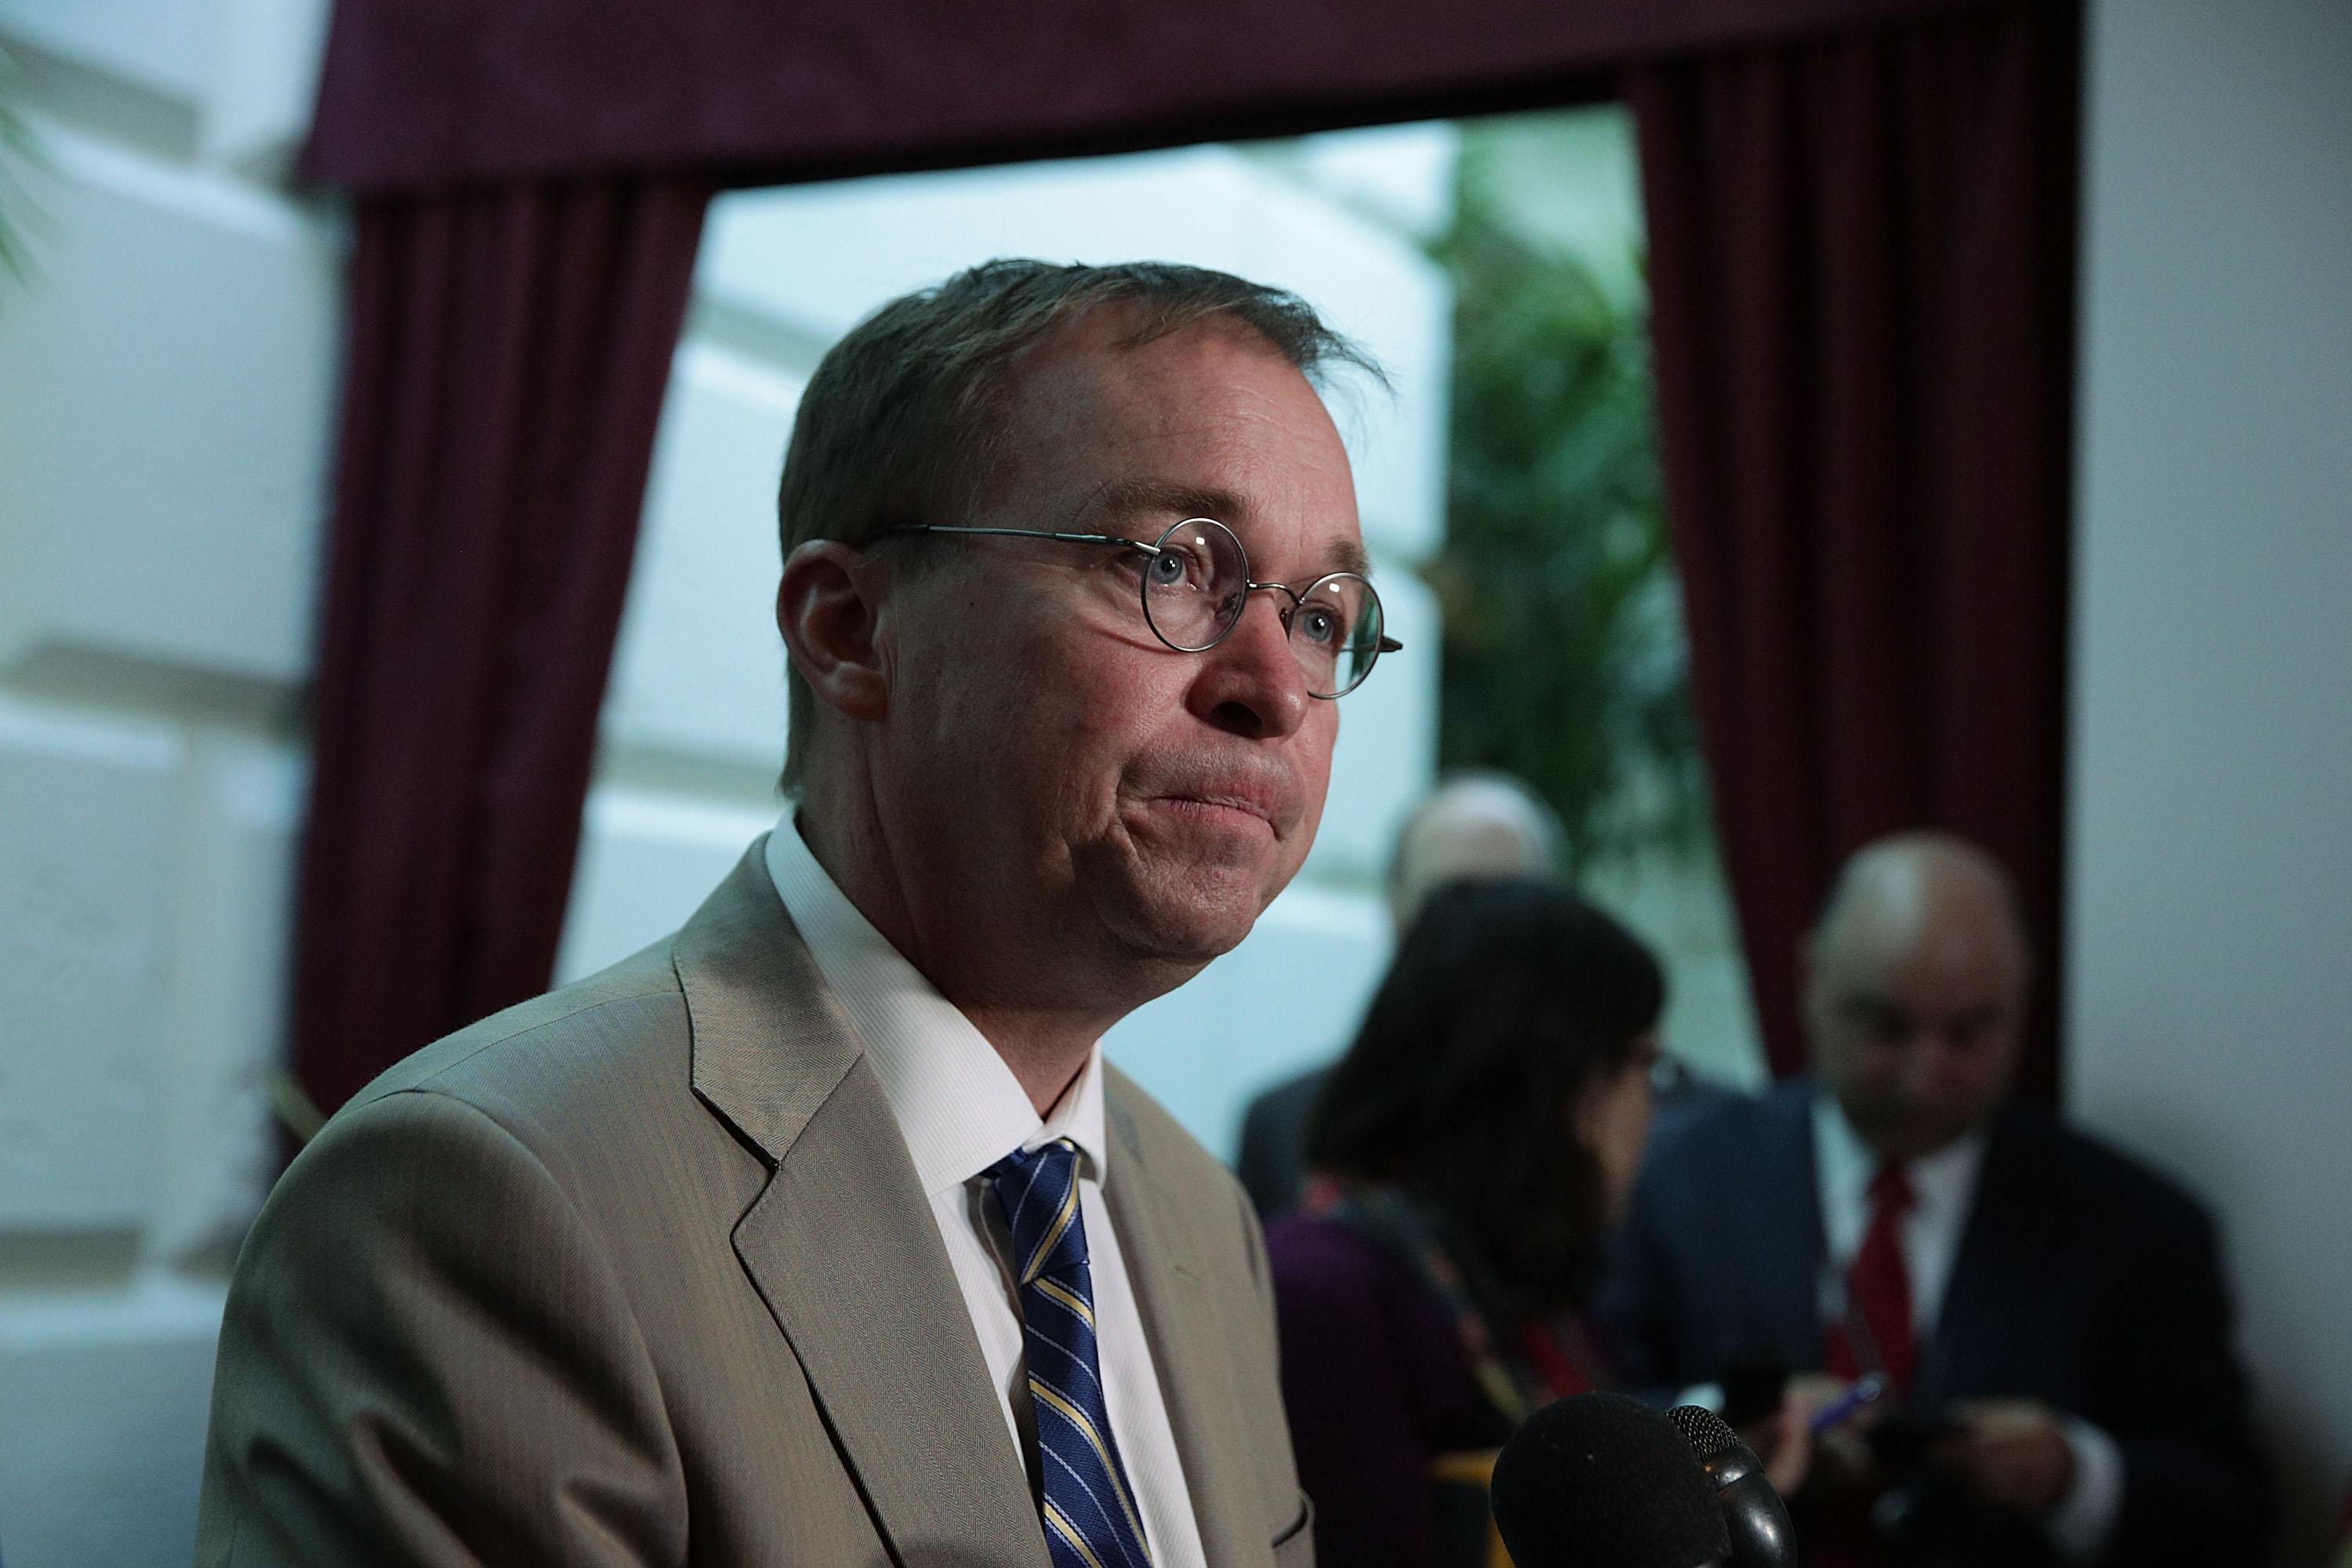 WASHINGTON, DC - SEPTEMBER 08:  White House Budget Director Mick Mulvaney speaks to members of the media after a House Republican Conference meeting September 8, 2017 at the Capitol in Washington, DC. Mulvaney was on the Hill to push for the Trump Administration's Hurricane Harvey relief and debt limit package.  (Photo by Alex Wong/Getty Images)